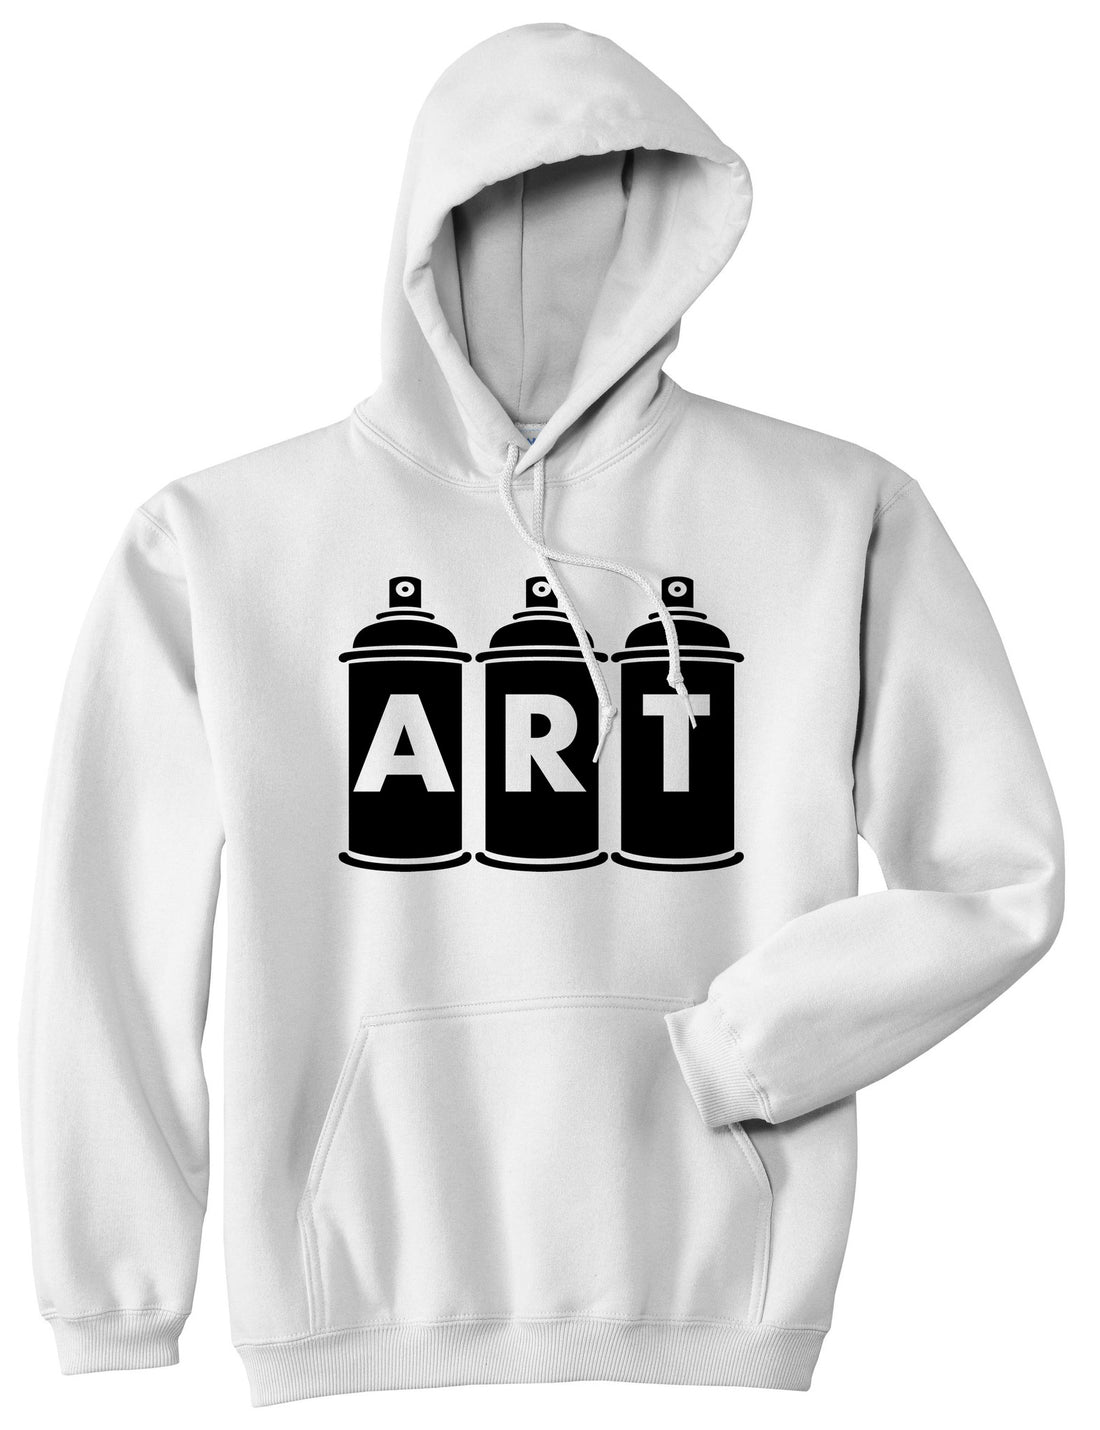 Art graf graffiti spray can paint artist Pullover Hoodie in White By Kings Of NY